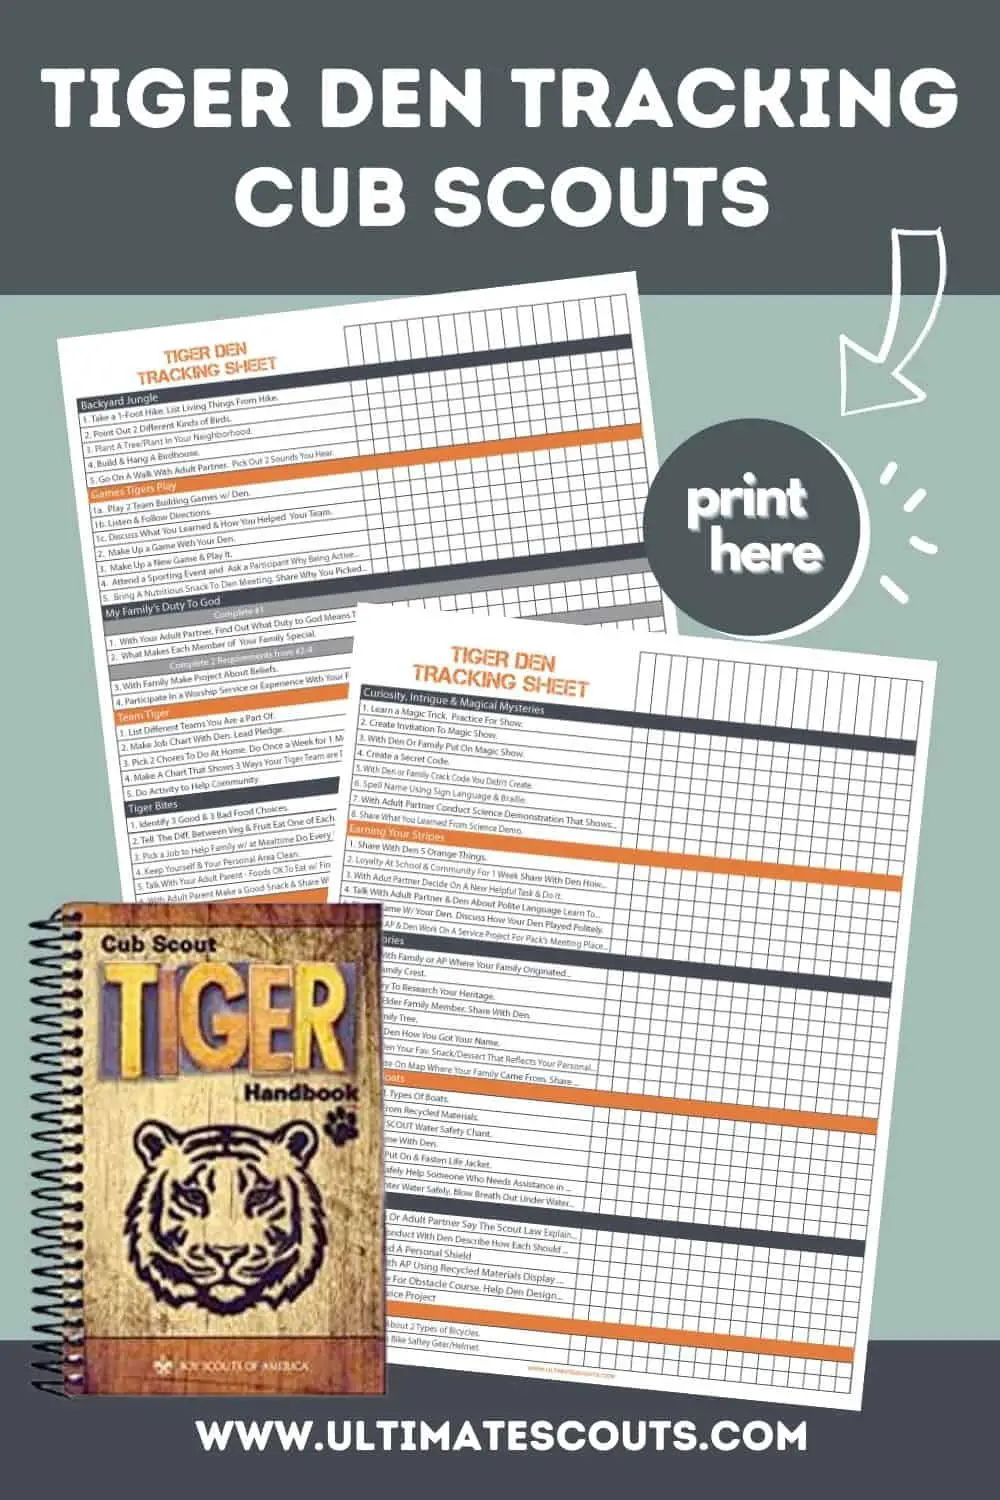 Tiger Scout Den Tracking Checklist (Free Printable)